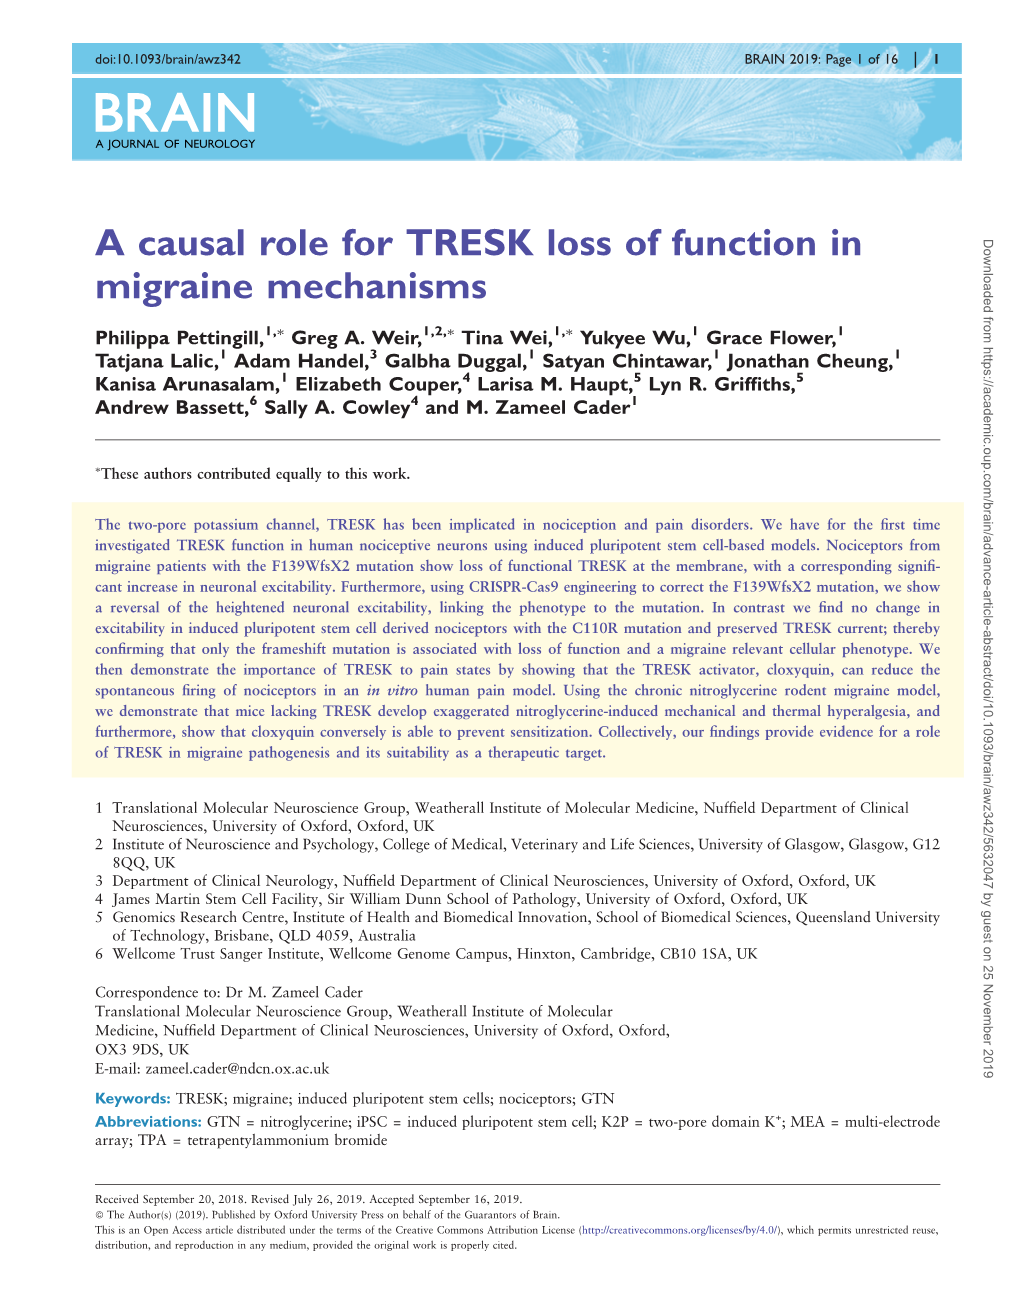 A Causal Role for TRESK Loss of Function in Migraine Mechanisms